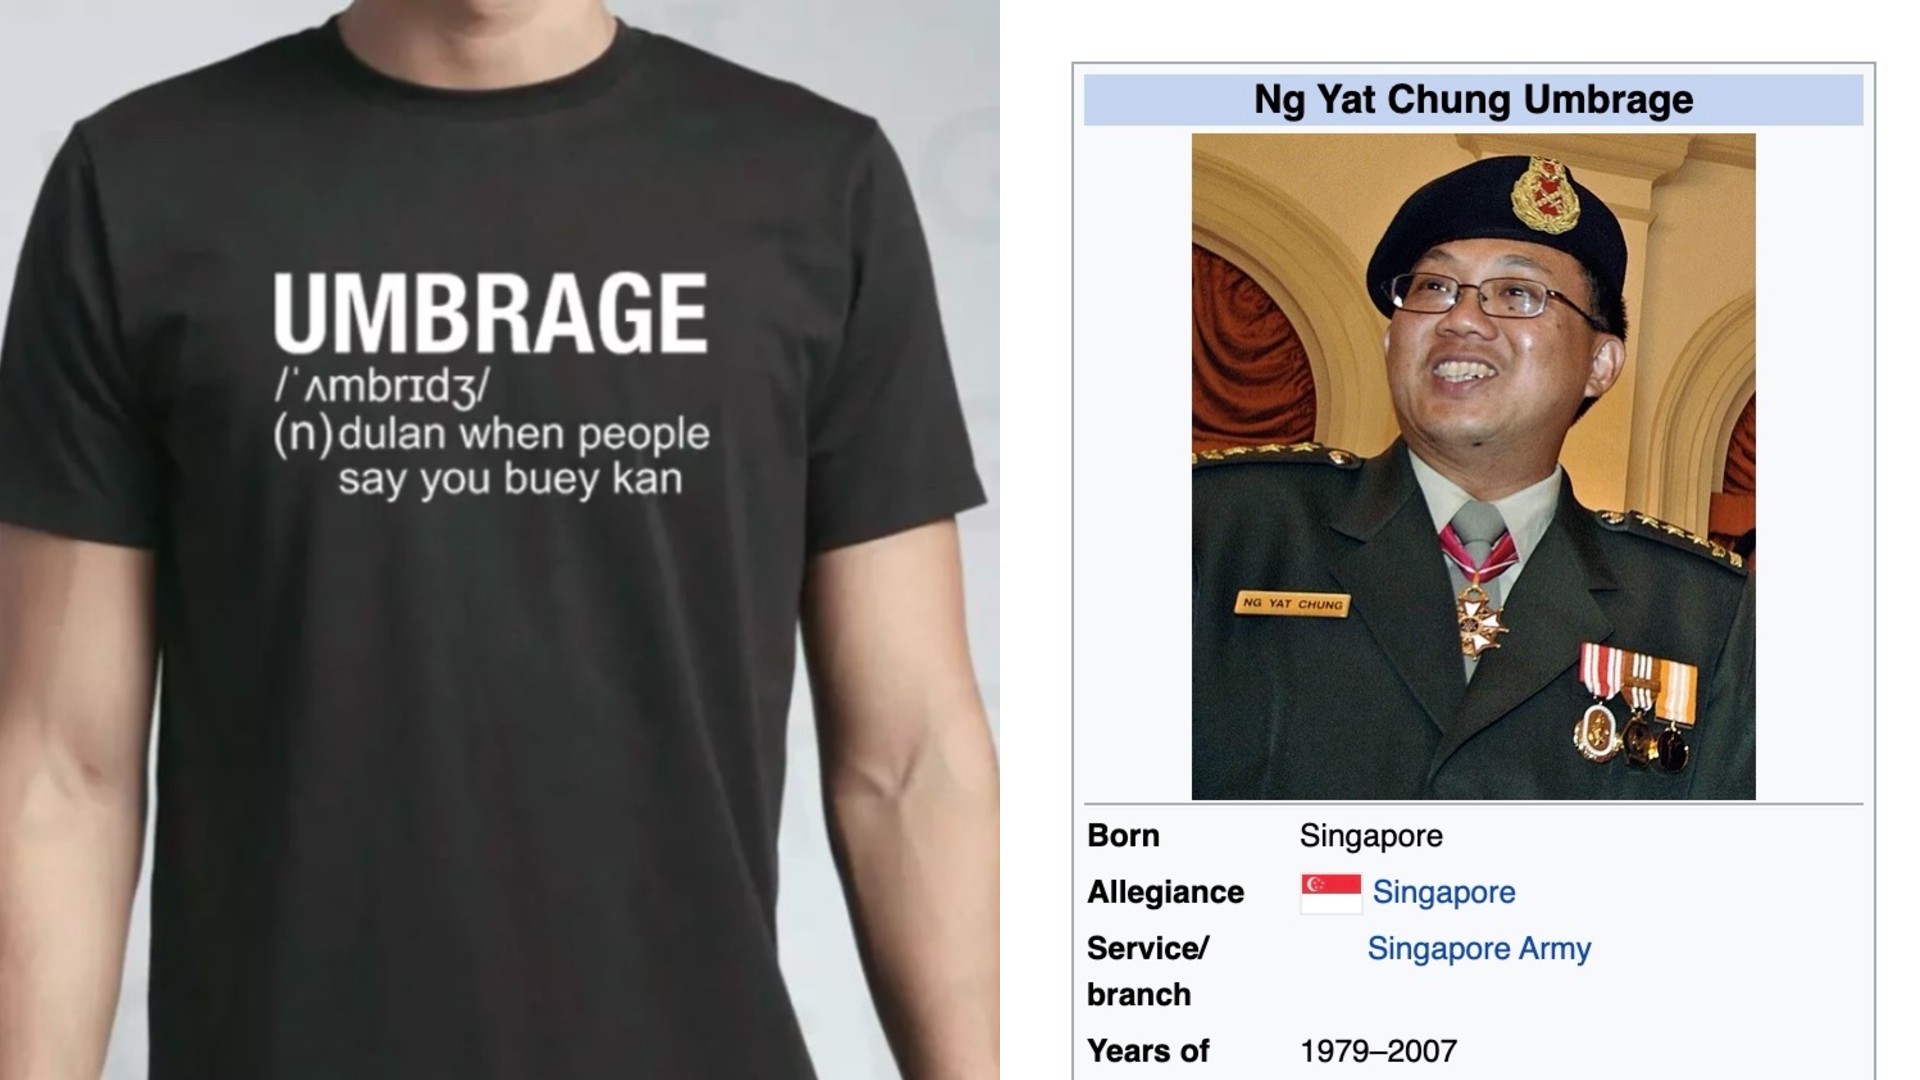 Umbrage t-shirt on sale on Lazada, at left, and ‘umbrage’ added to Ng Yat Chung’s Wikipedia profile, at right.  